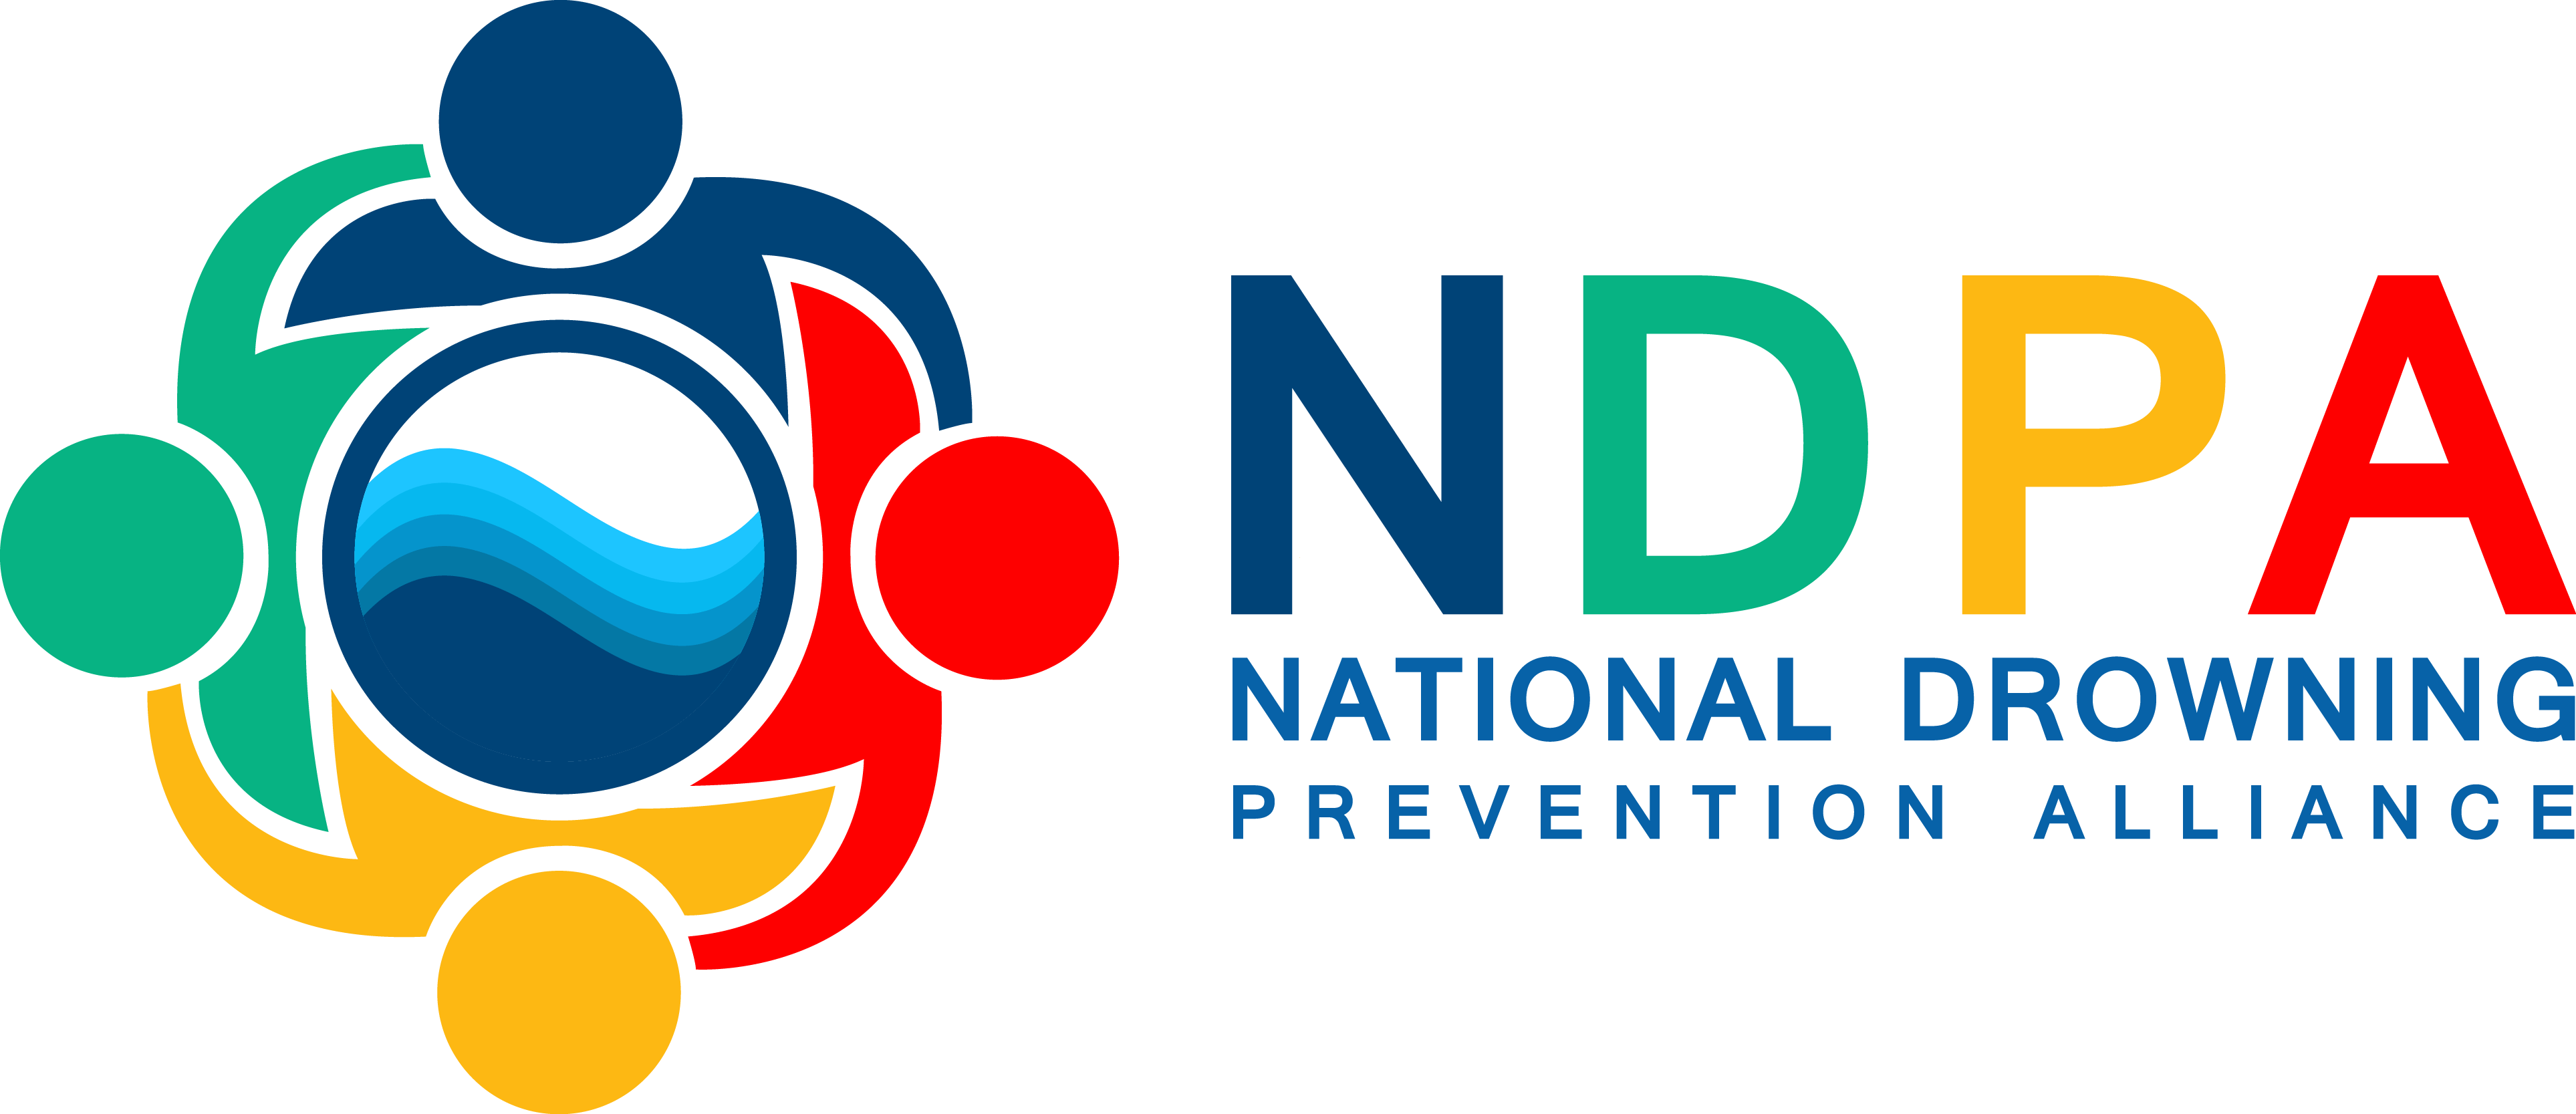 United We Can Logo - NDPA.org. Drowning is Preventable